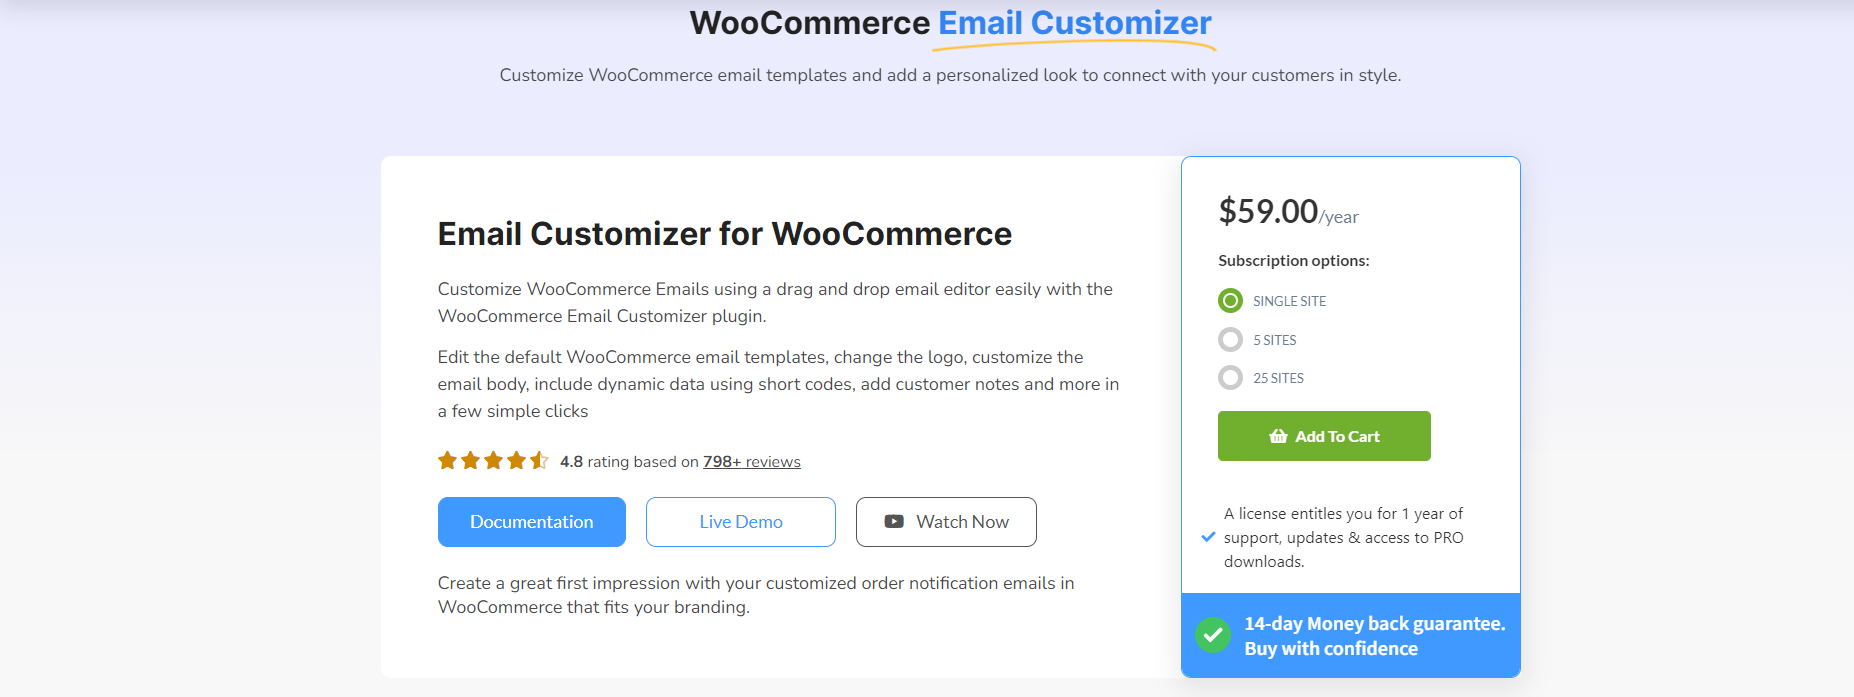 Email Customizer for WooCommerce – Flycart